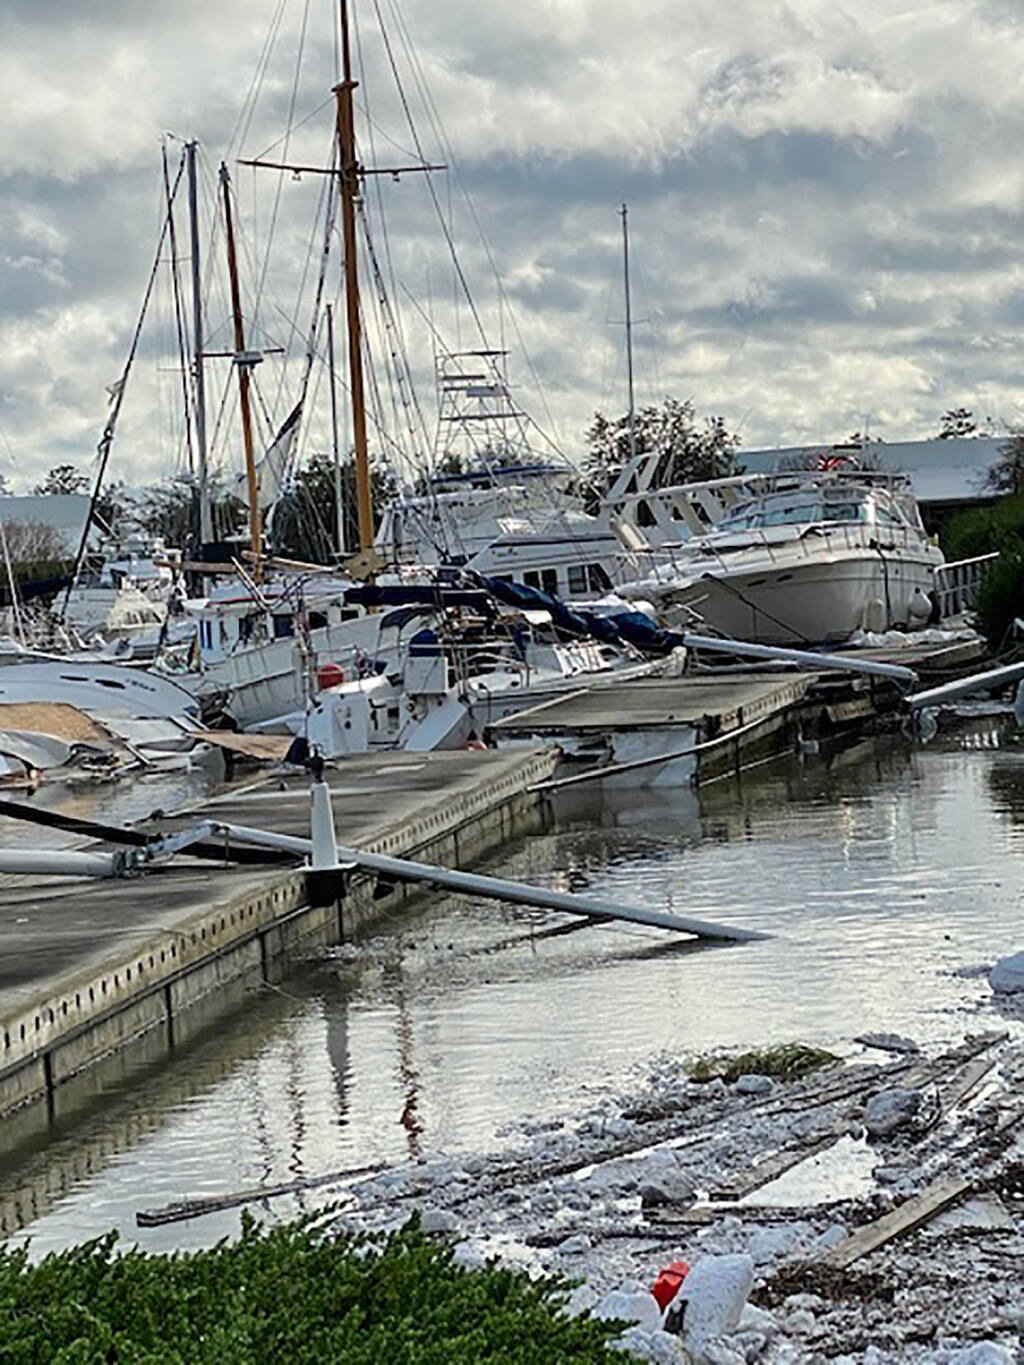 This photo provided by Tina Austin shows damage at the Barber Marina in Elberta, Ala., Wednesday, Sept. 16, 2020, caused by Hurricane Sally. (Tina Austin via AP)